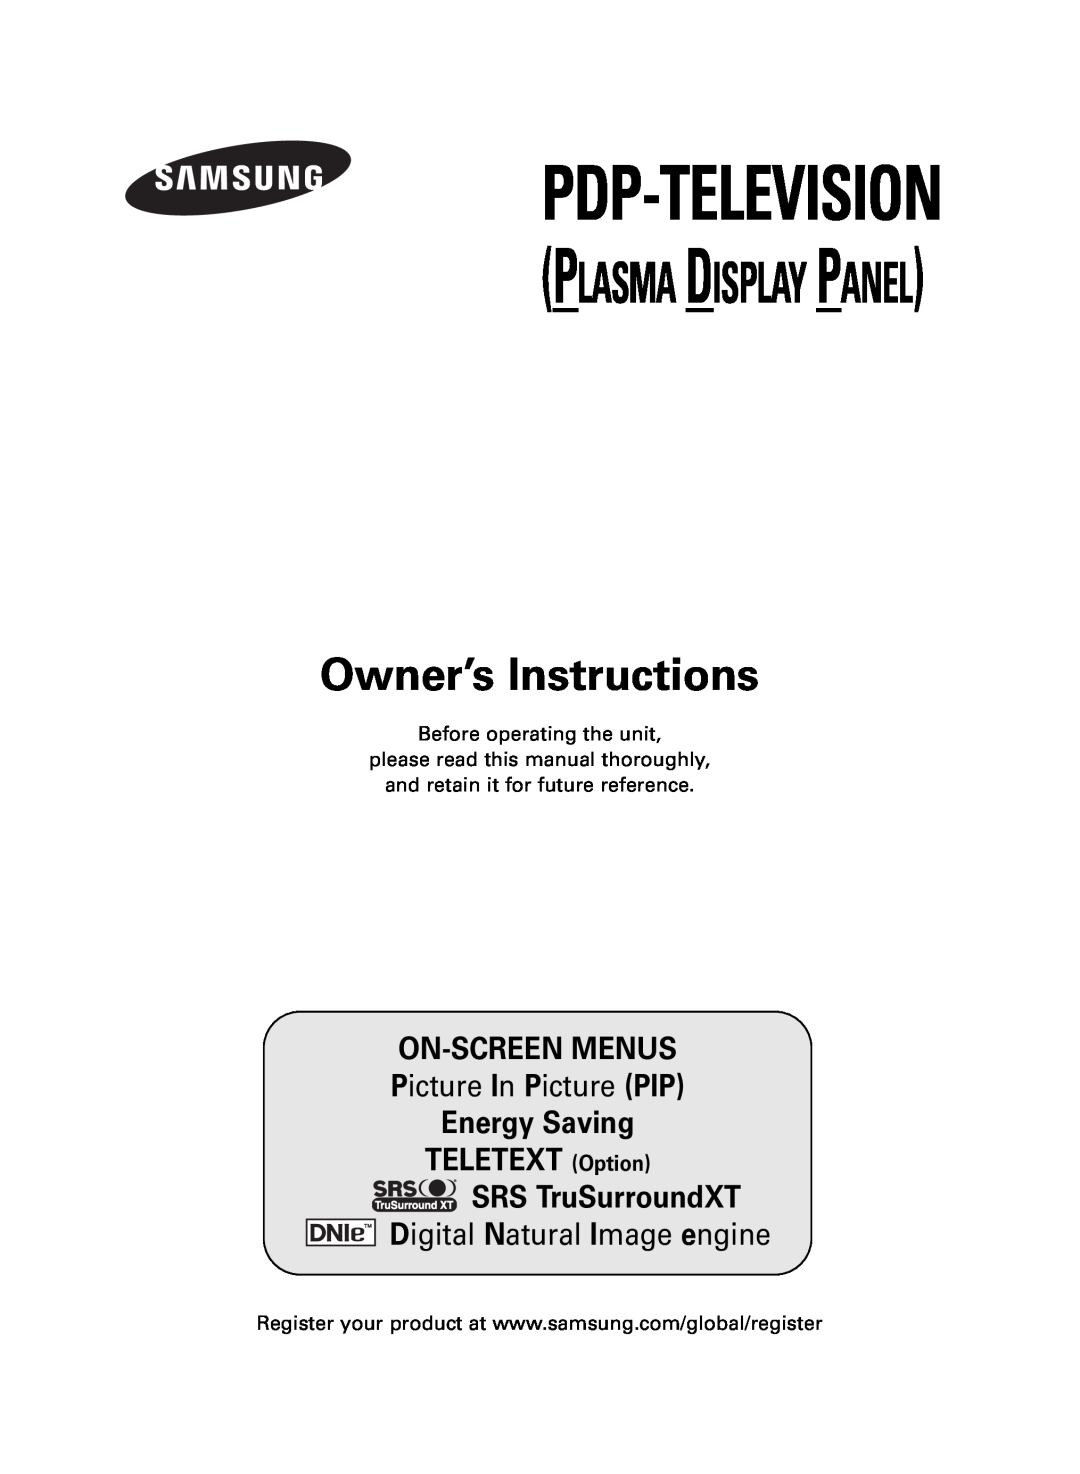 Samsung PDP-TELEVISION manual Before operating the unit, Pdp-Television, Owner’s Instructions, On-Screen Menus 